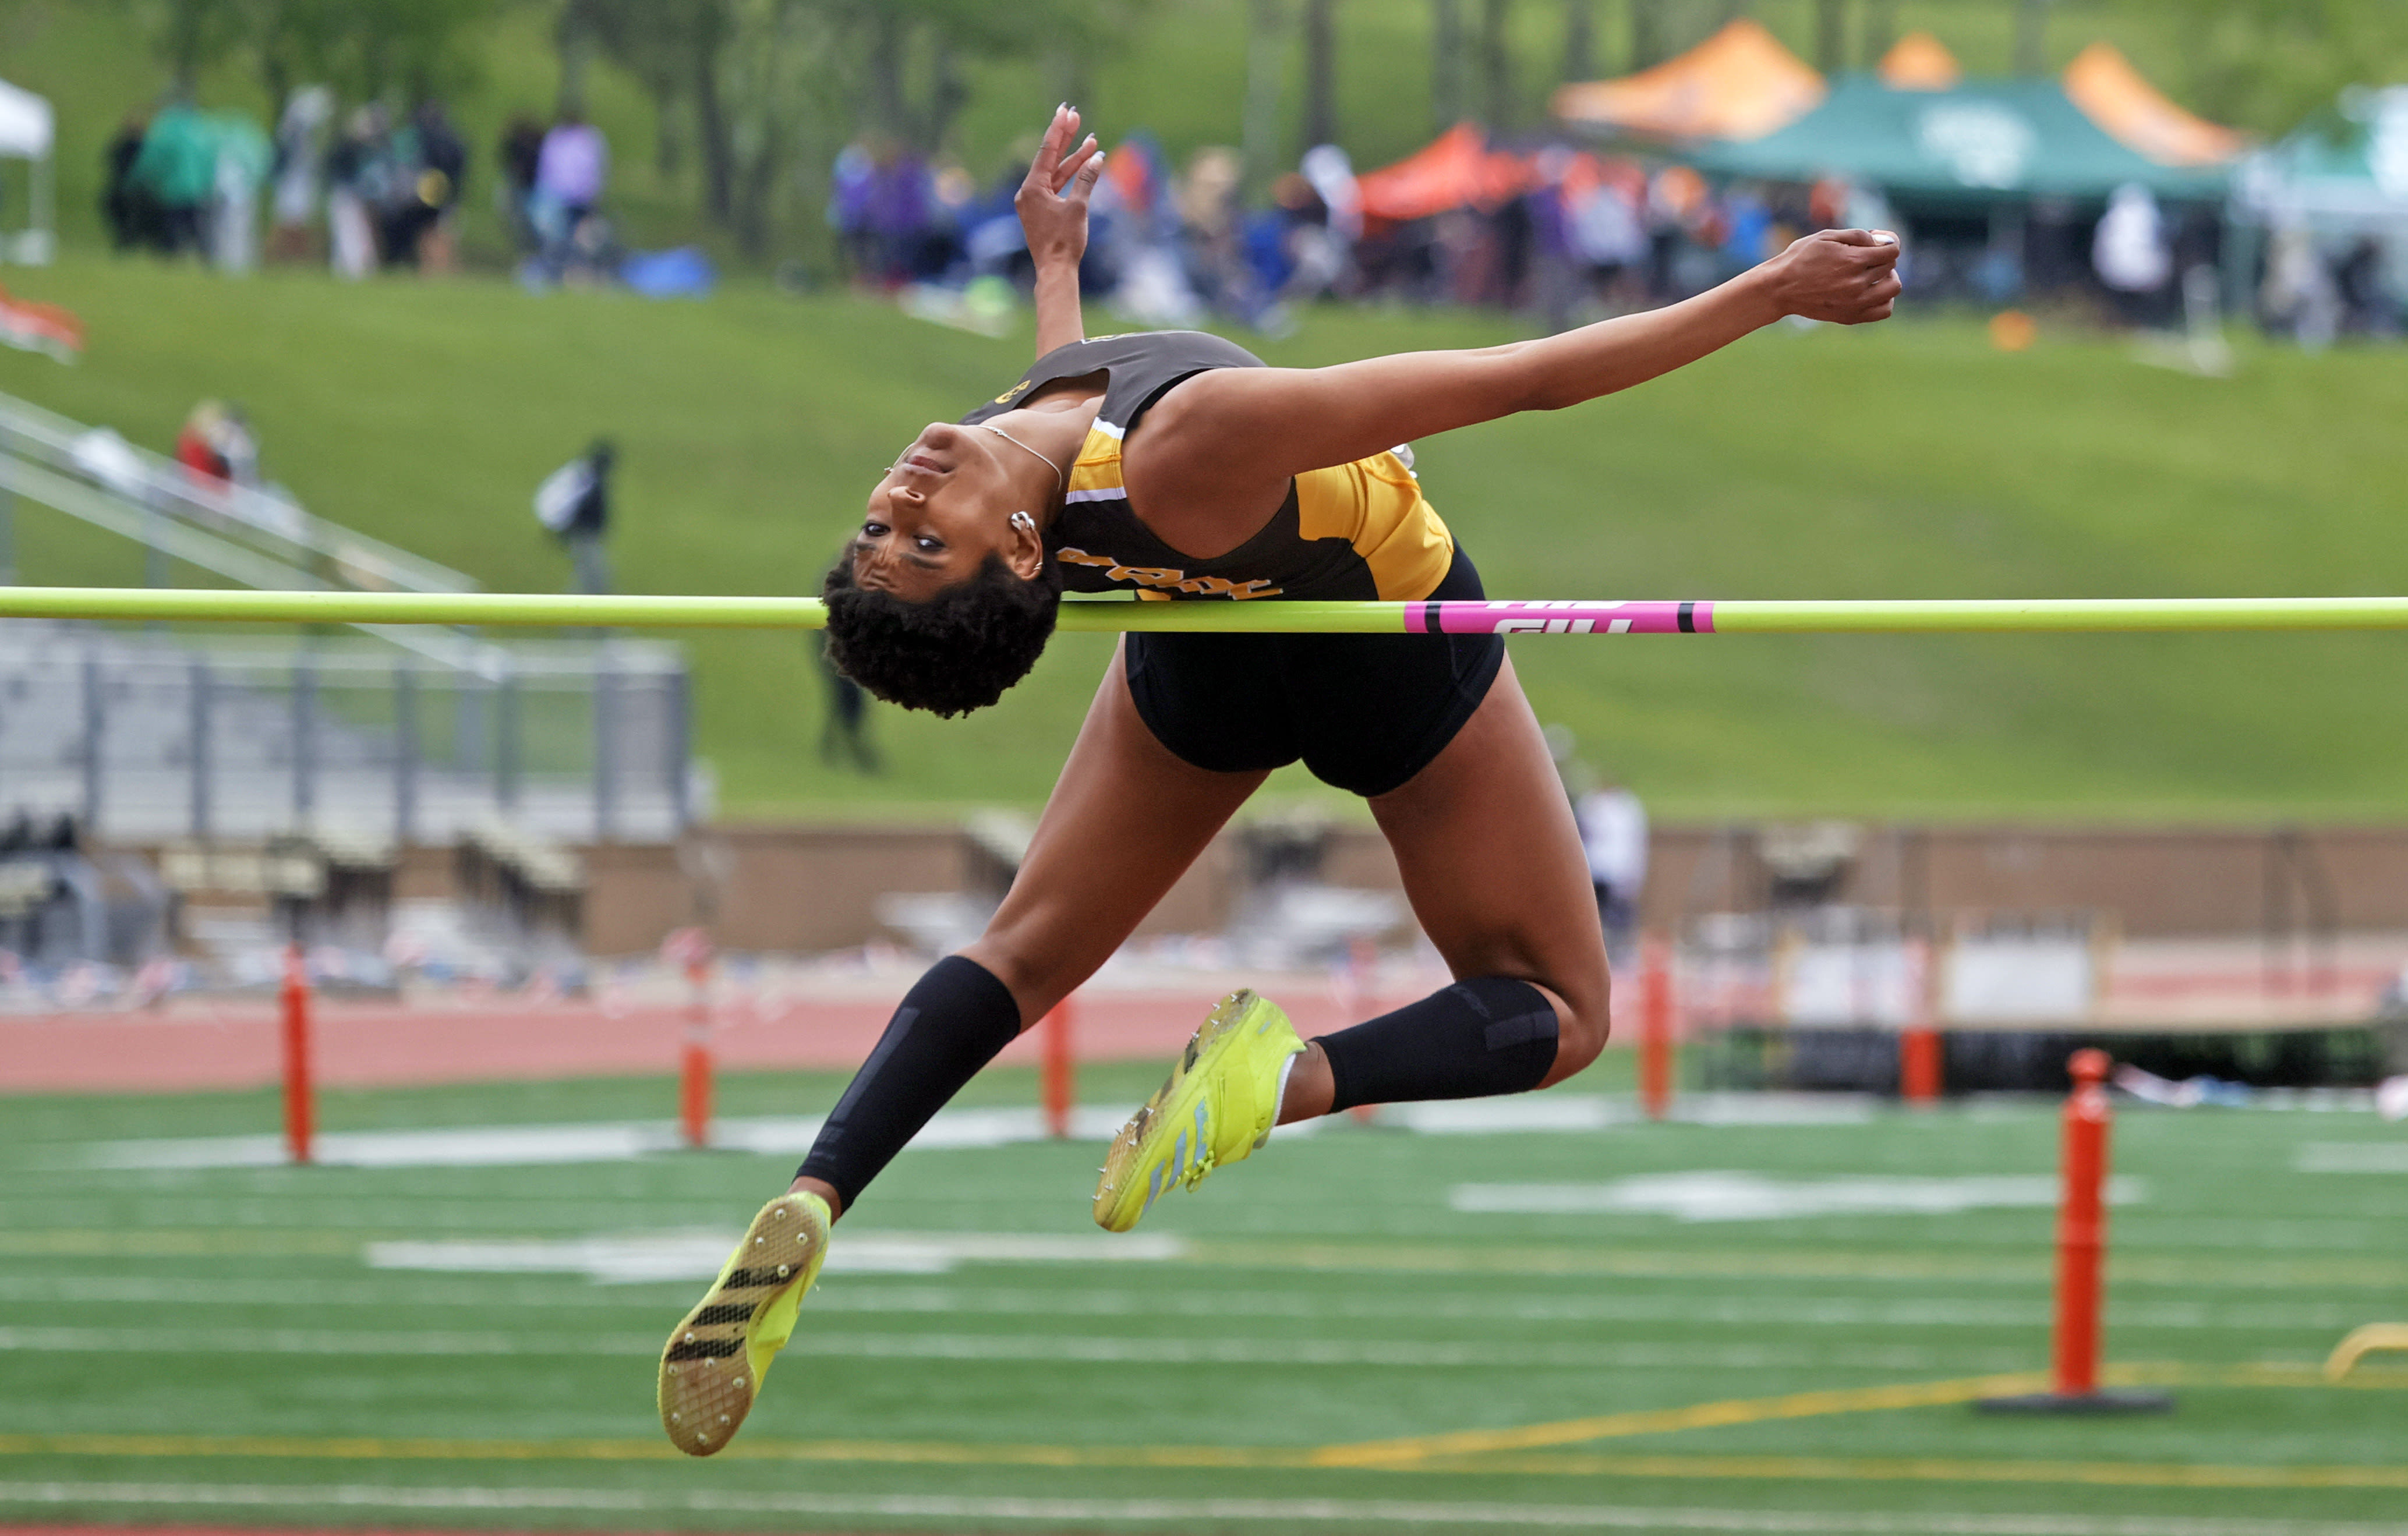 PHOTOS: Scenes from Day 1 of the North Dakota state track and field meet